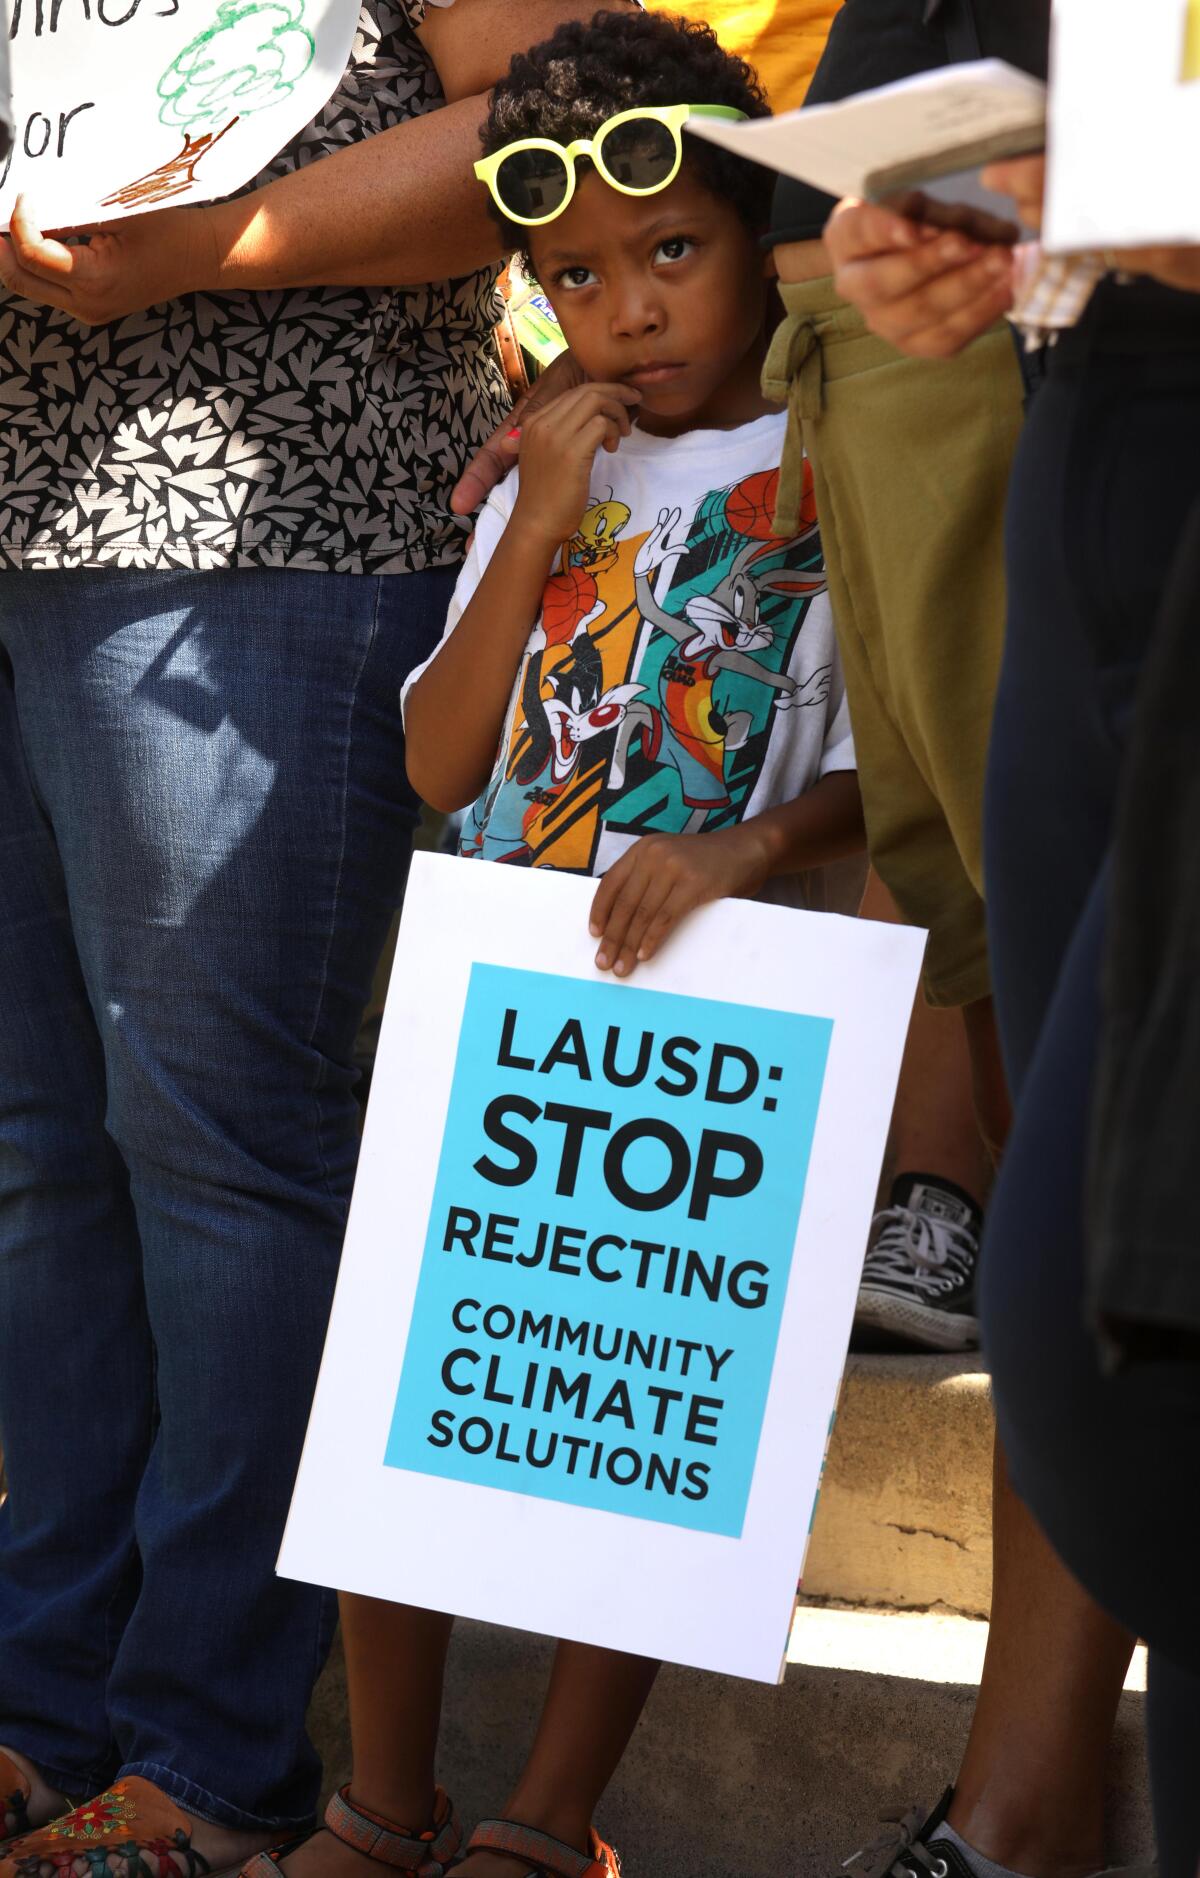 A child stands between two adults. The child is holding a sign that says, "LAUSD: Rejecting community climate solutions."